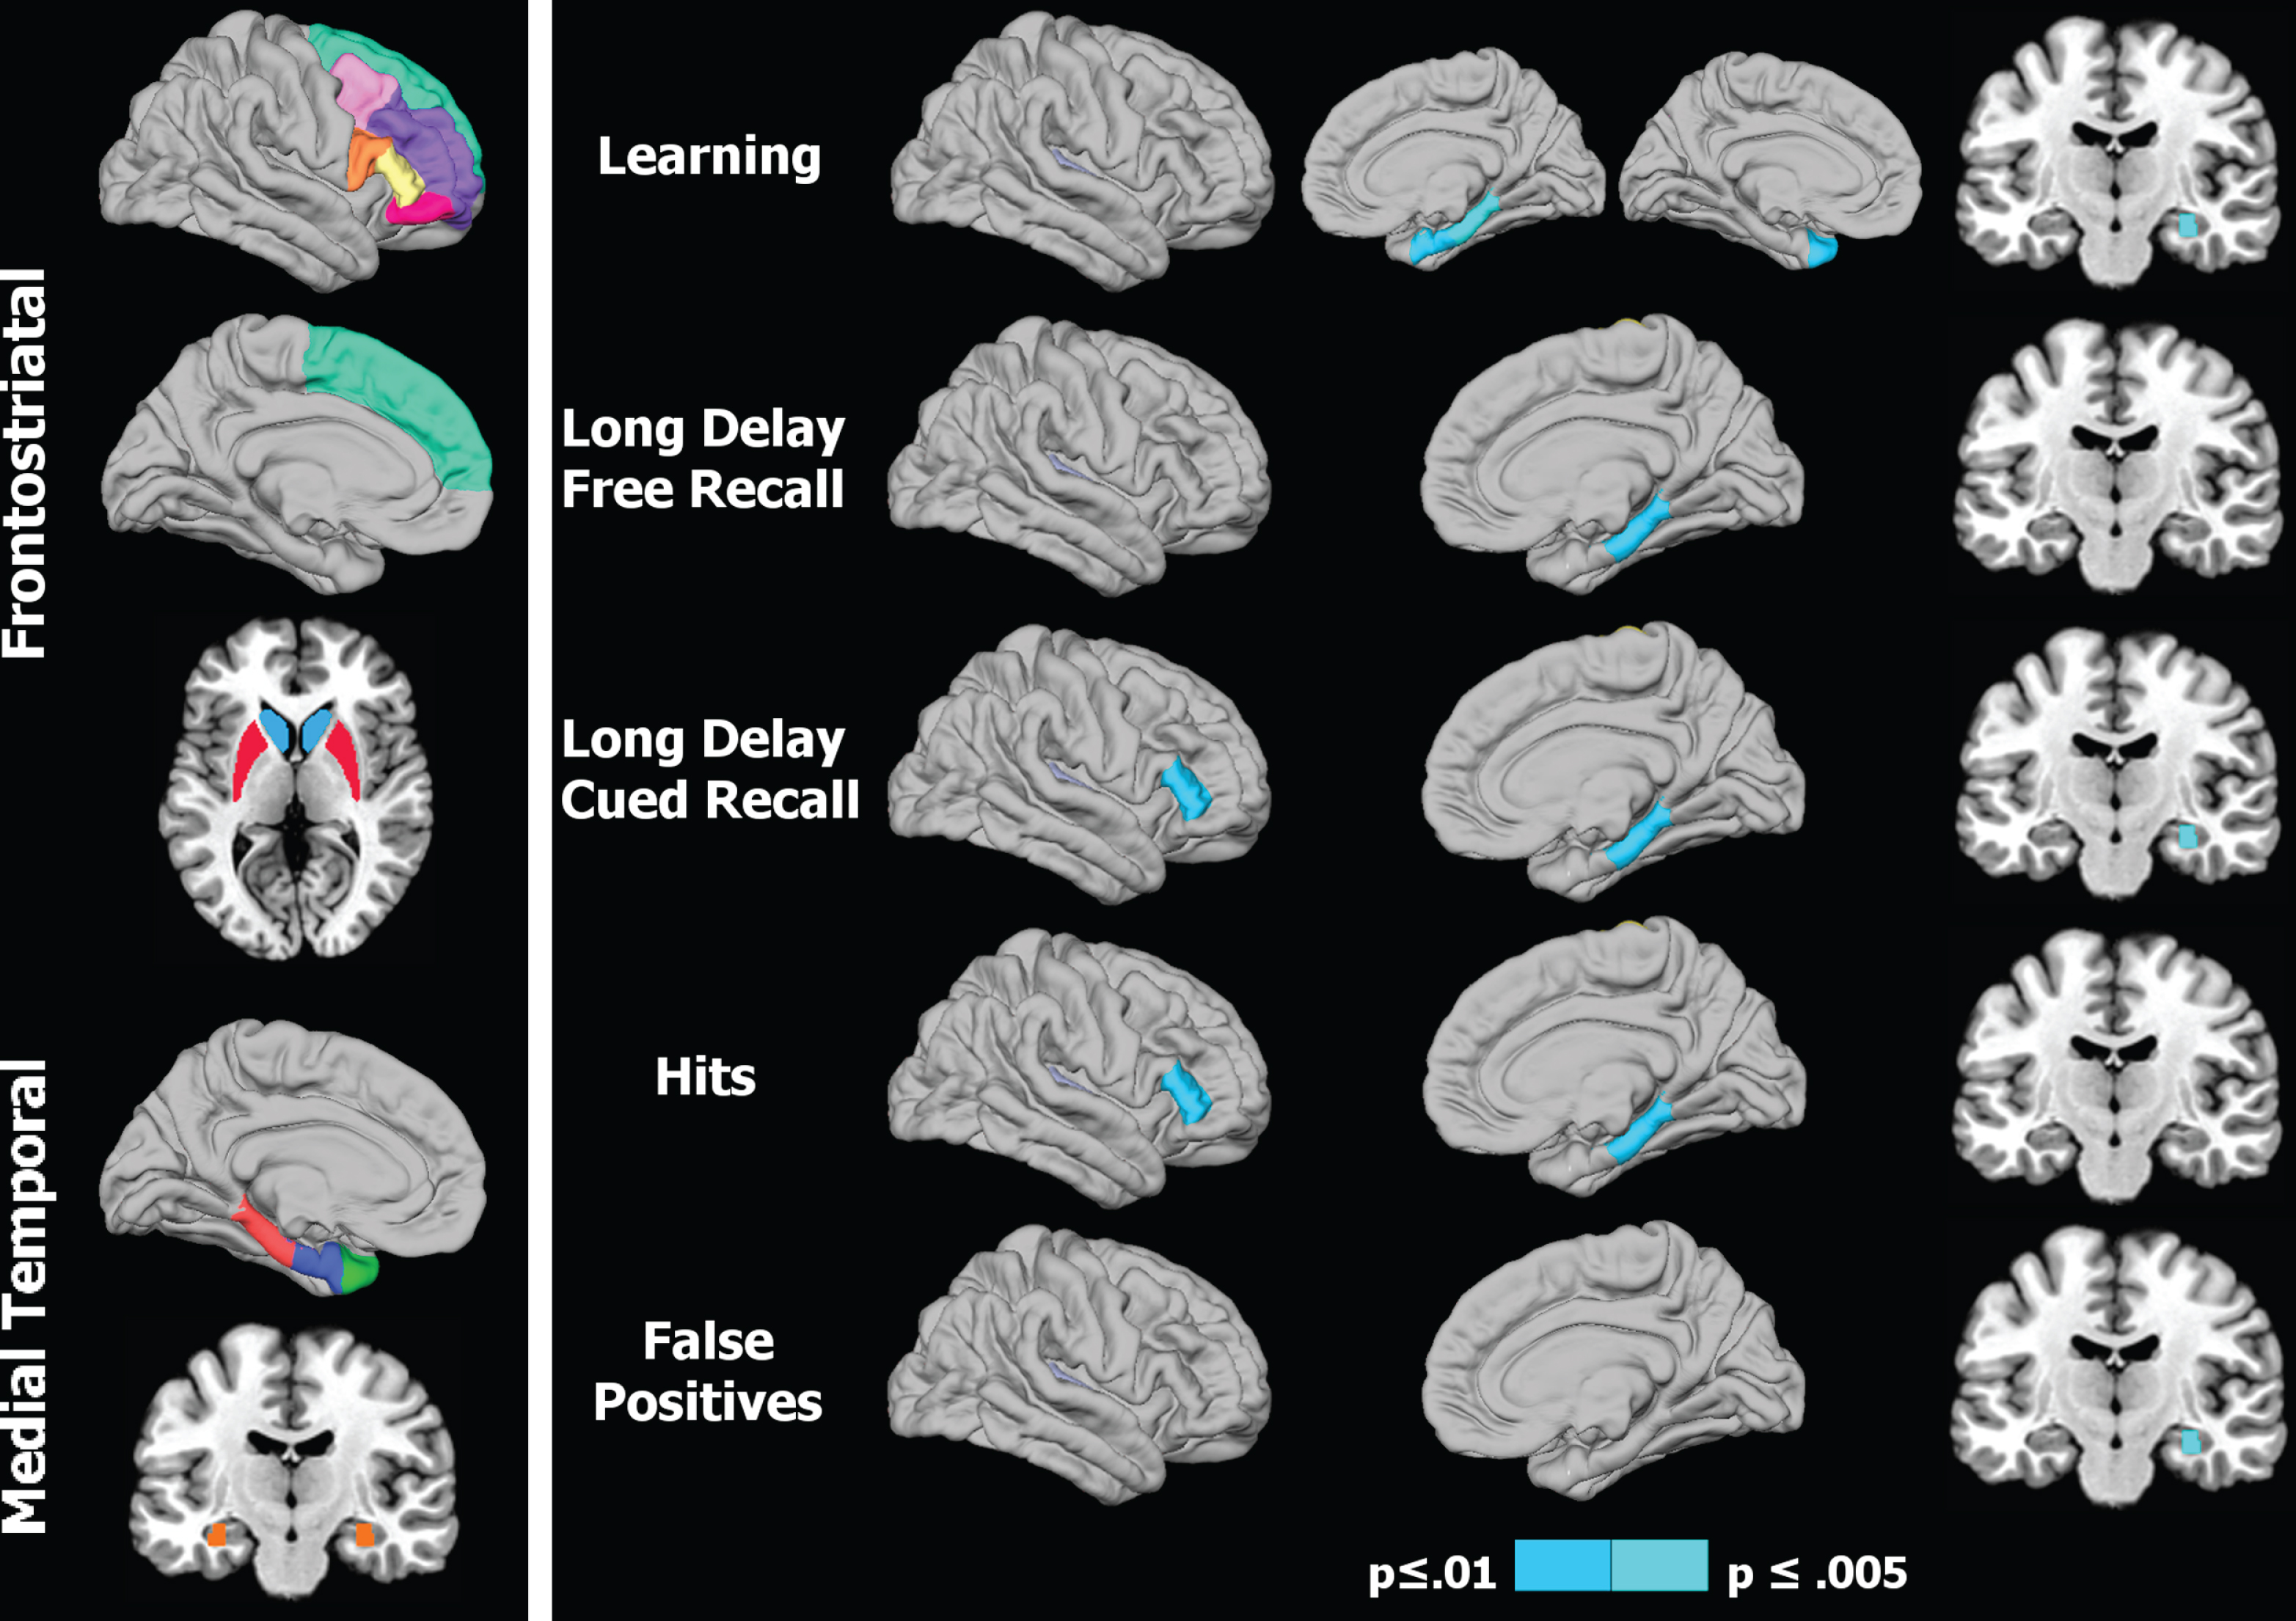 Regional volumes of interest and their association with memory in Parkinson’s patients. 1) Left panel: Colored areas designate regions of interest (ROI) in the frontostriatal and medial temporal systems. ROIs on sagittal surfaces are displayed for one hemisphere, but were analyzed for homologous areas of both hemispheres. The caudate/putamen and the hippocampus are respectively shown on axial and coronal views. 2) Right panel: Right hemisphere cortical (lateral/medial sagittal surfaces) and hippocampus (coronal view) volumes that significantly correlated with various memory measures. For CVLT learning (top row), the left hemisphere medial surface displays the significant correlation with the temporal pole. The p value for correlation coefficients is designated by the color bar; p≤0.01 (dark blue) and p≤0.005 (light blue).